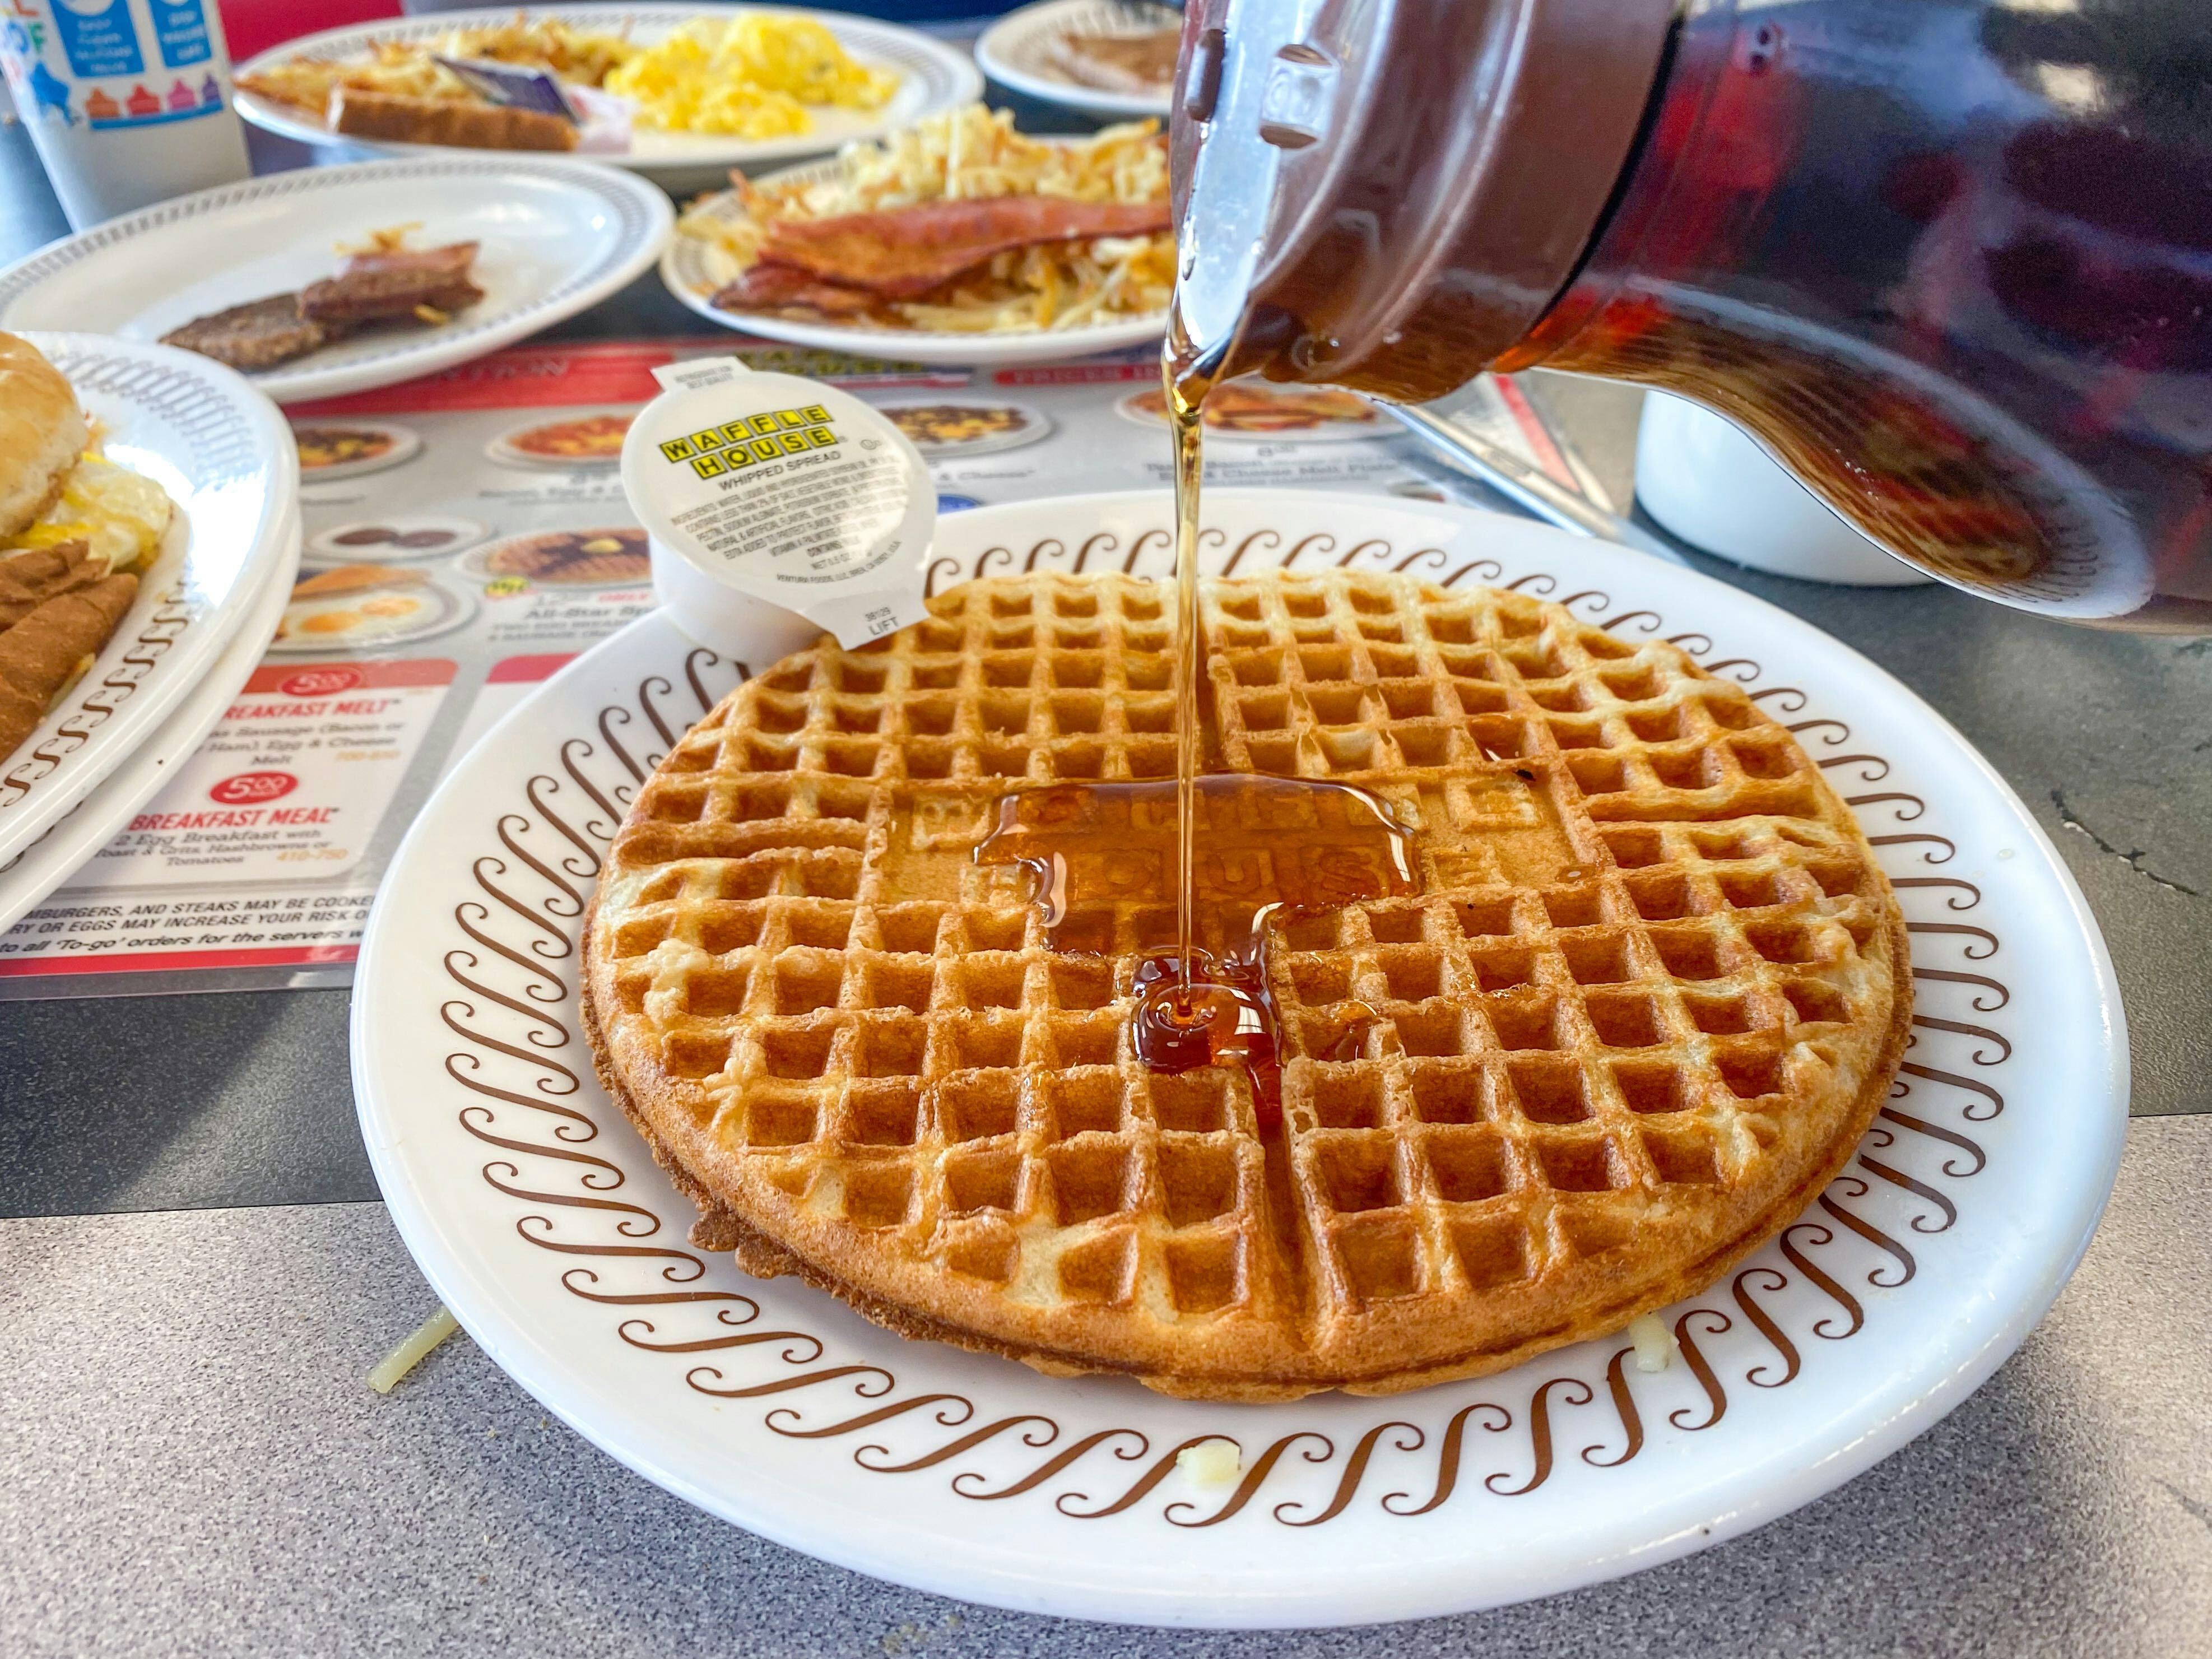 Someone pouring syrup onto a plated waffle on a table at Waffle House.